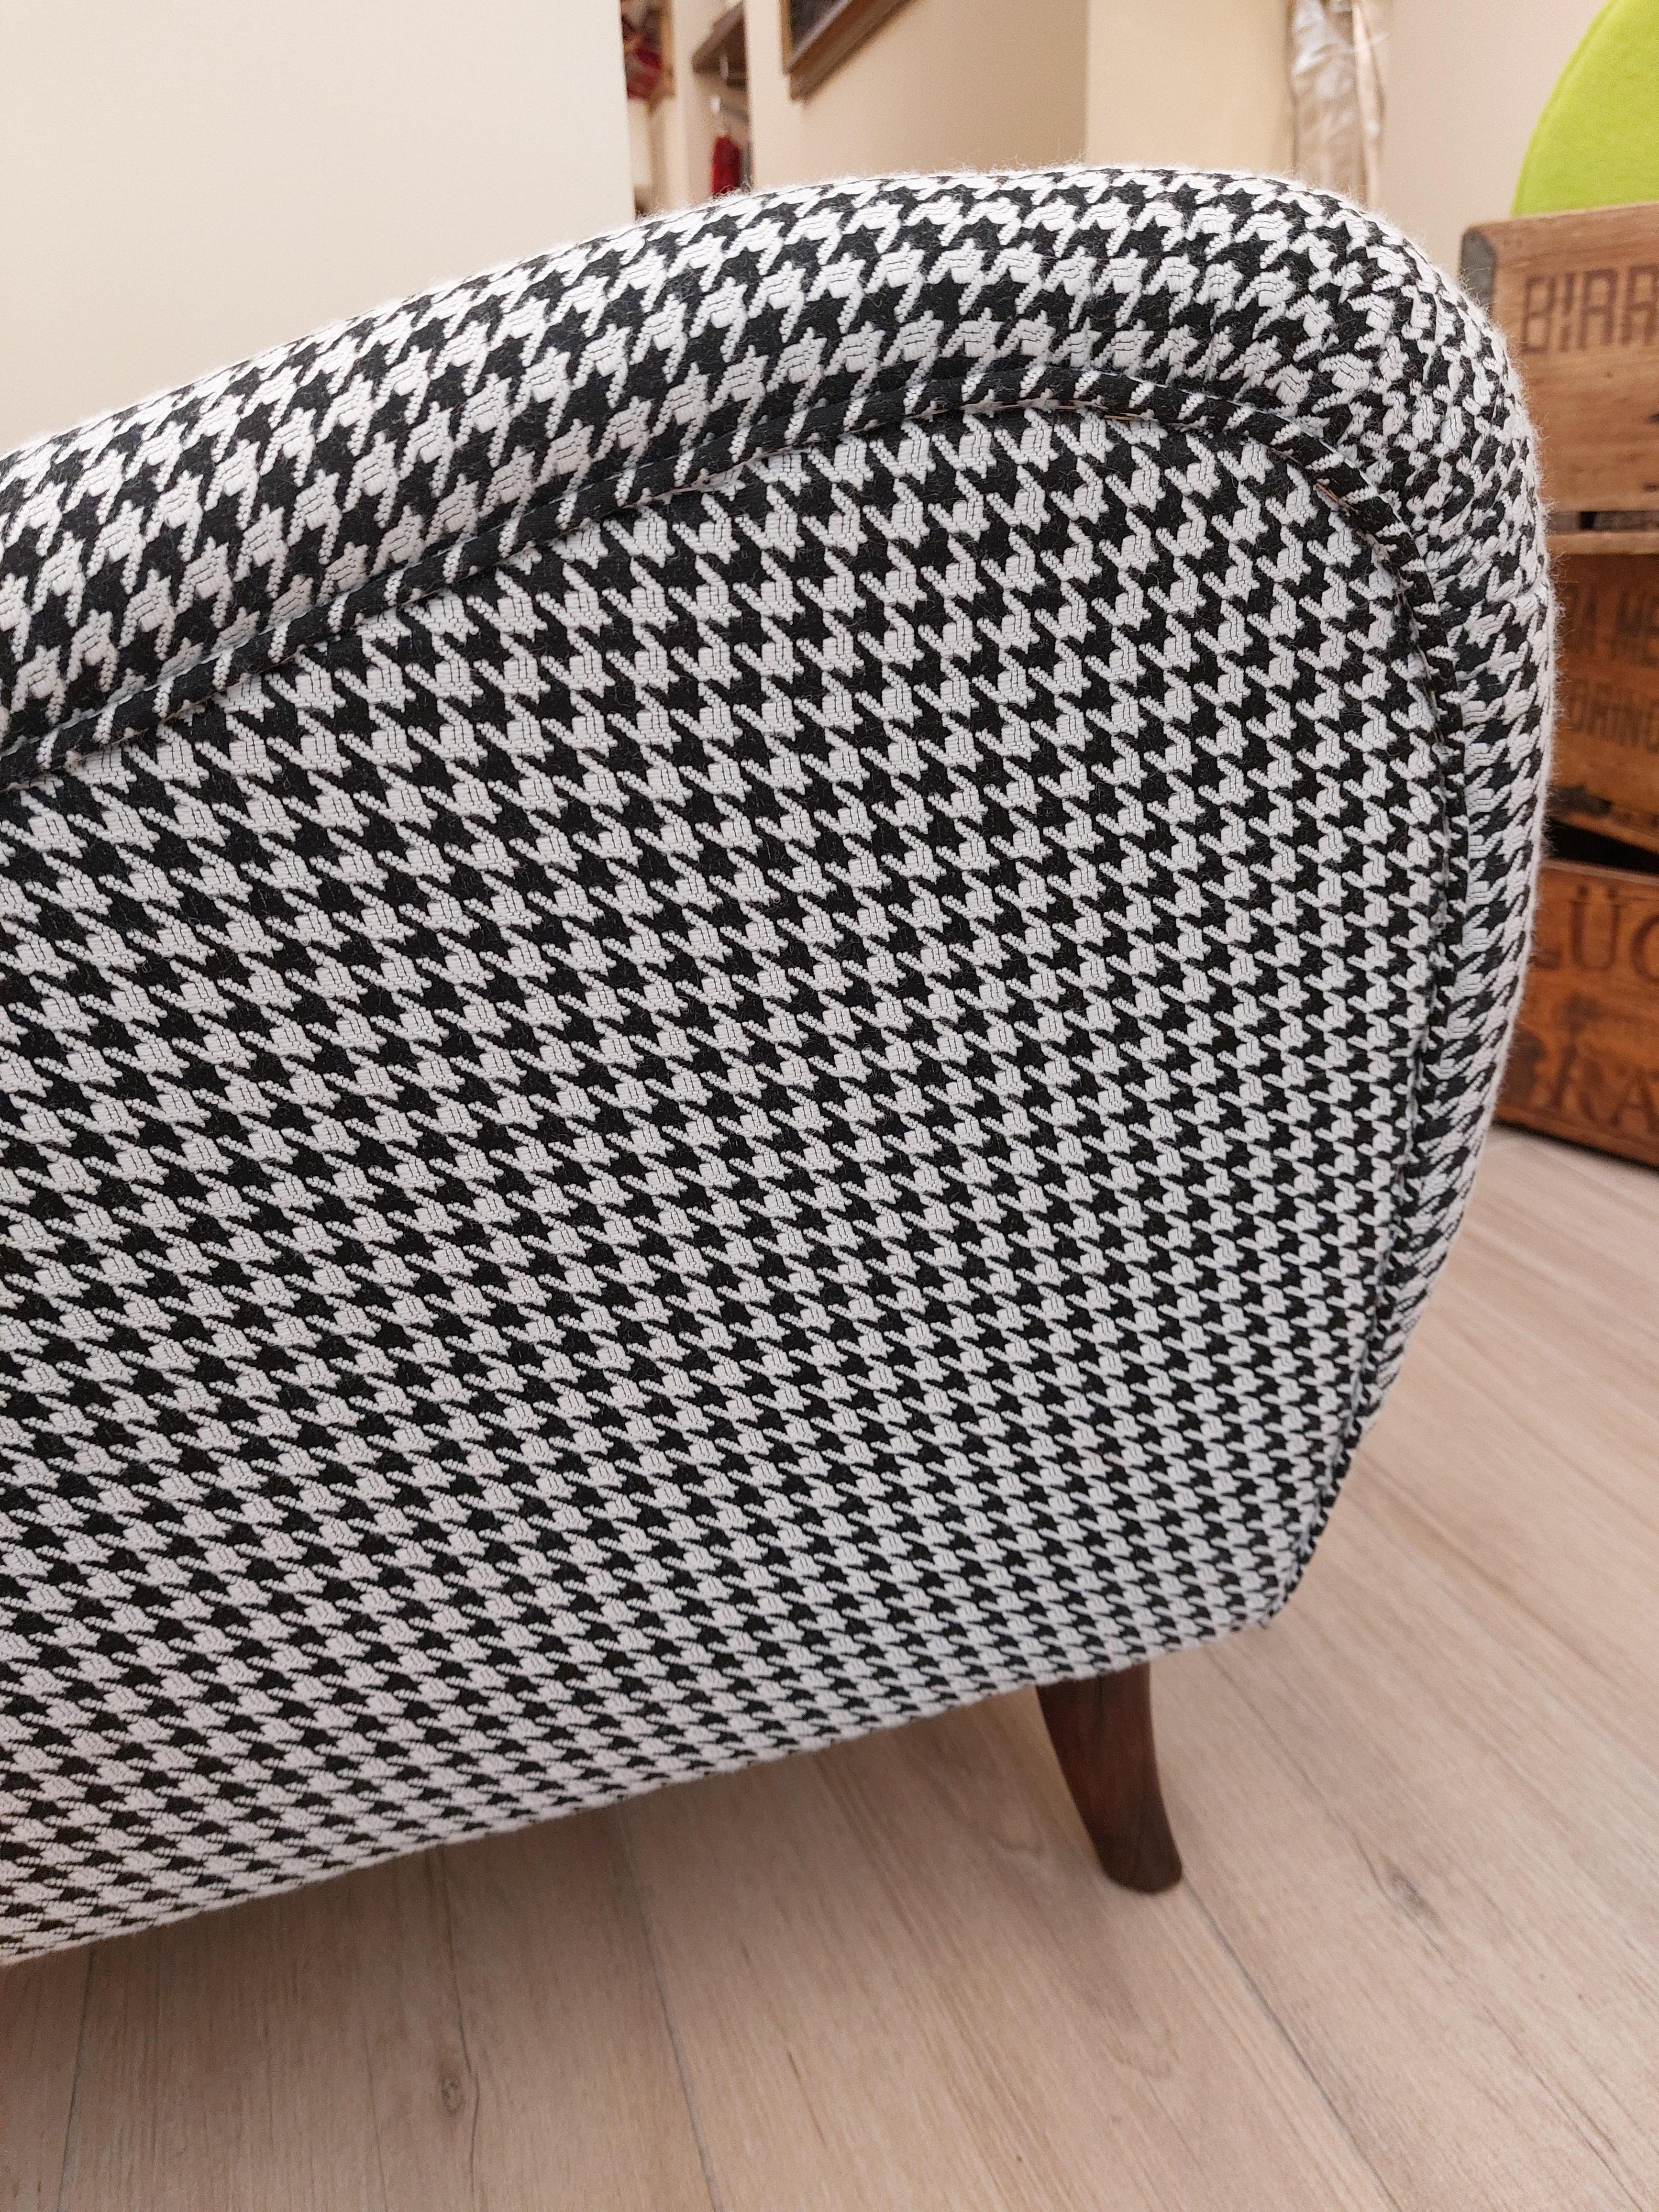 '40s Armchair with New Houndstooth Upholstery 3